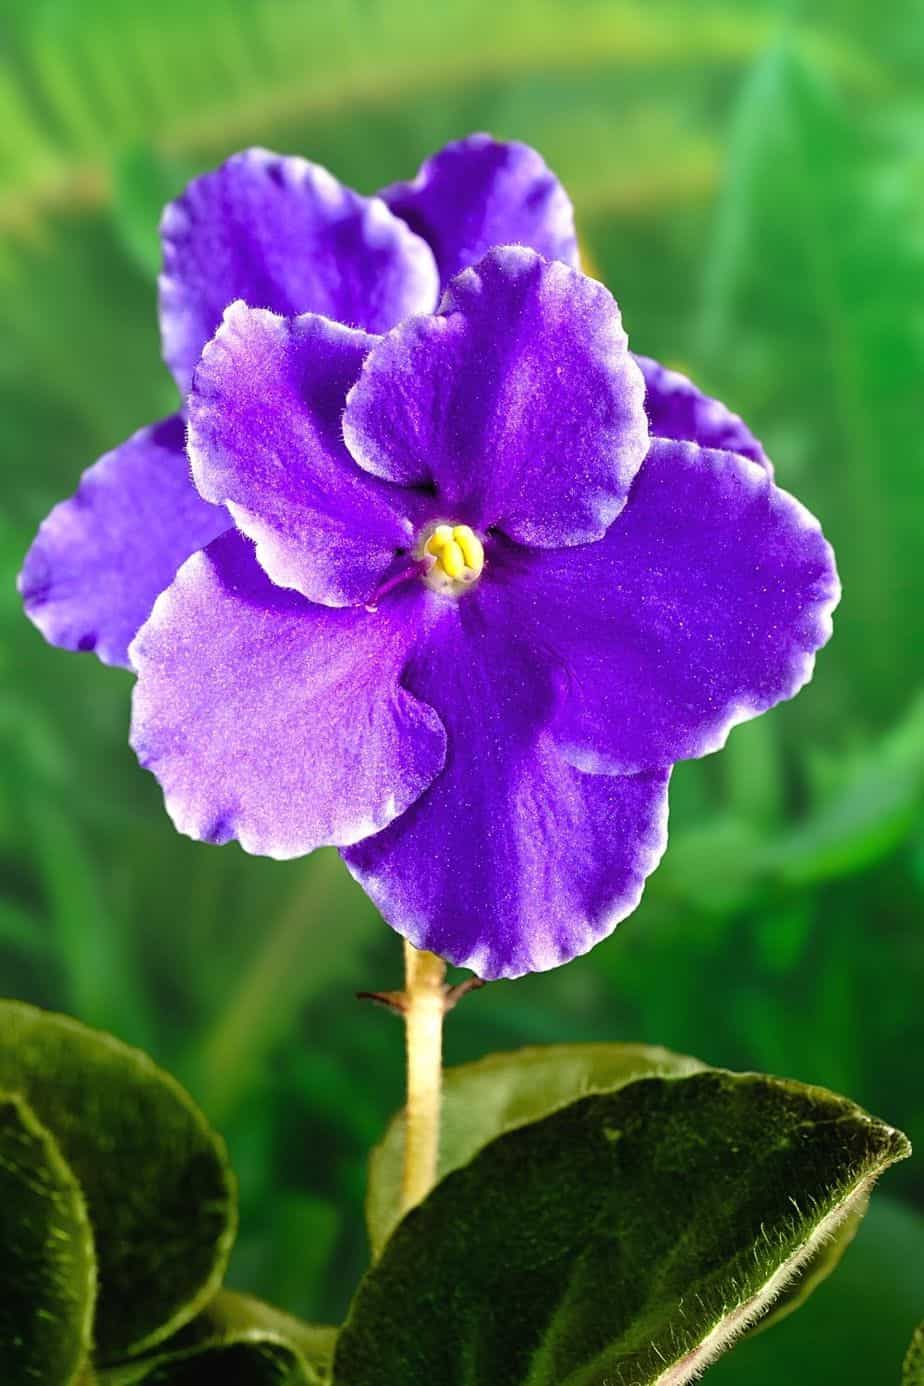 You can grow African Violet in water, but keep a close eye on the water's temperature 